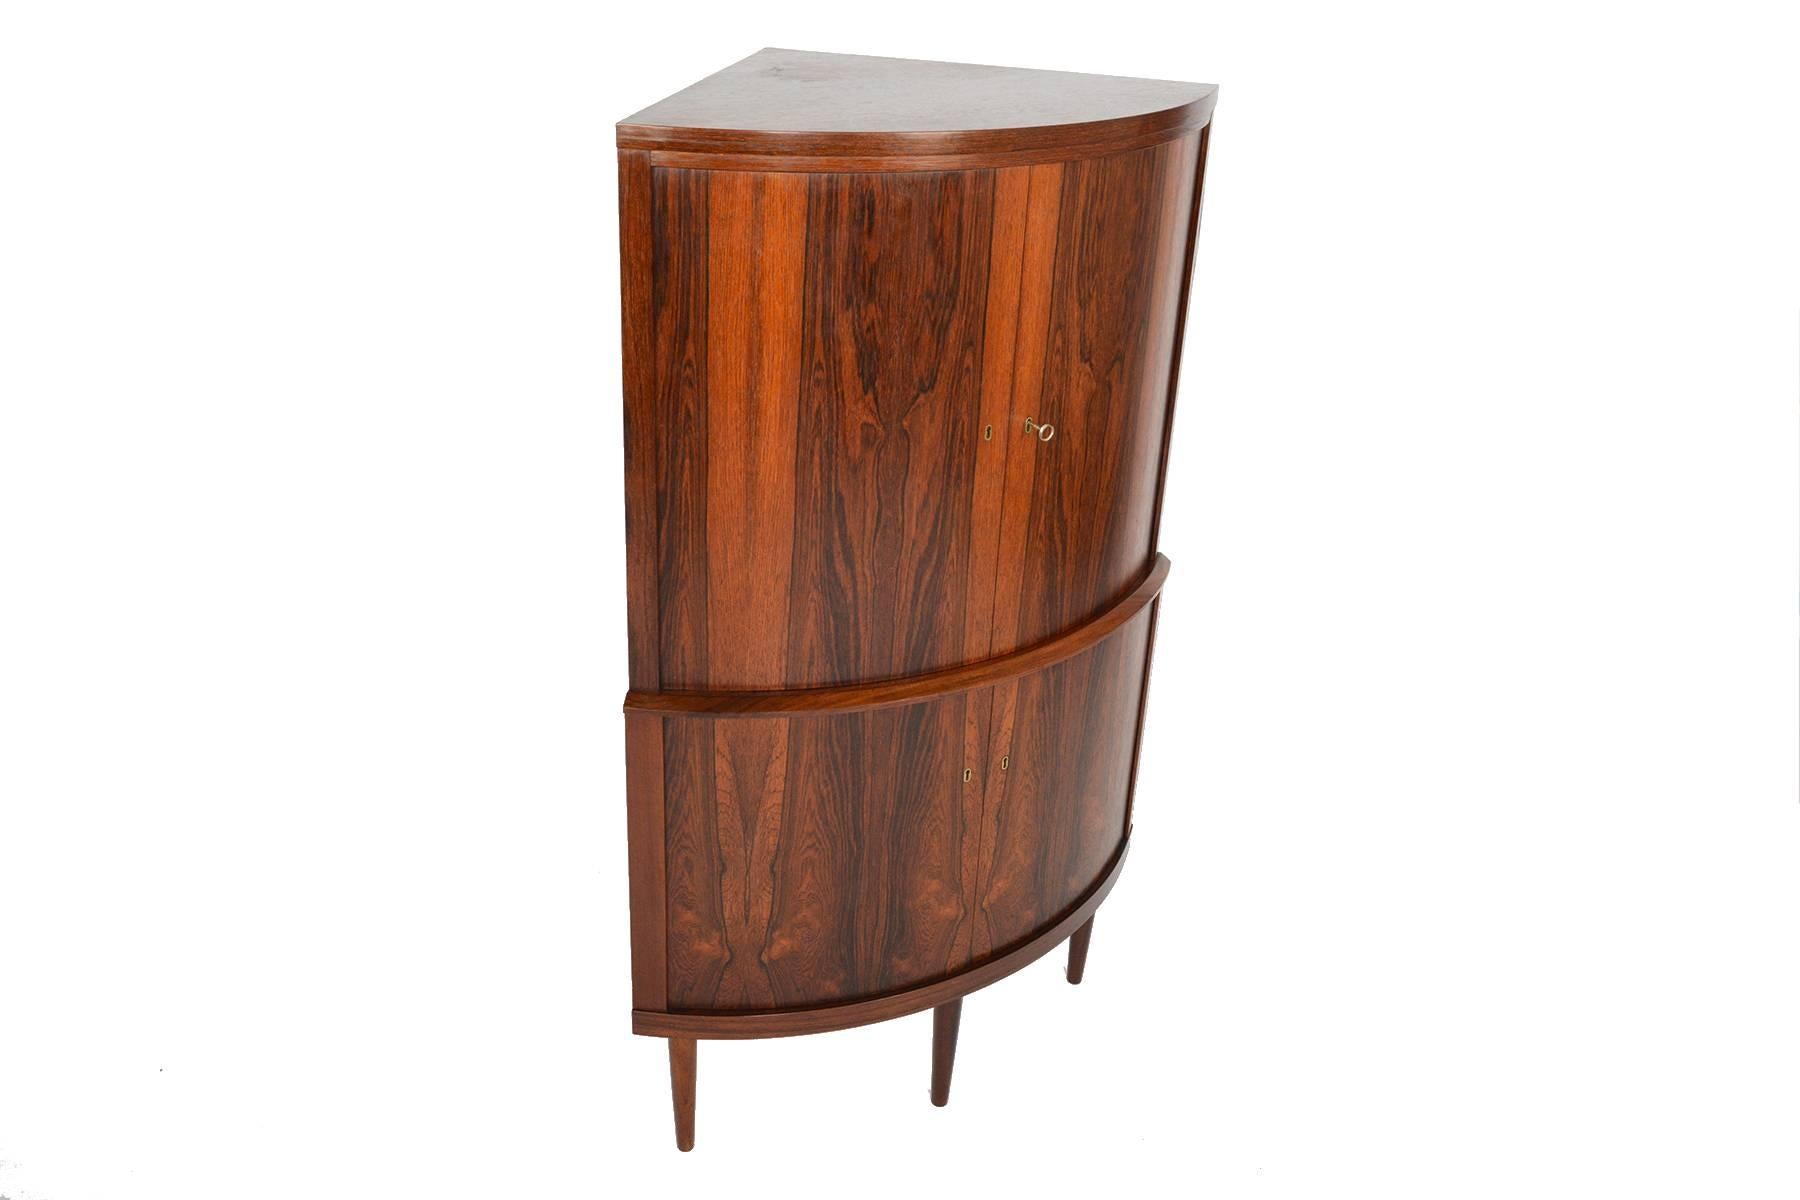 This beautifully understated bow front corner unit in Brazilian rosewood features a Classic and stunning Silhouette. The curved doors unlock onto a large shelved interior. The lower compartment provides additional storage. With a total of three